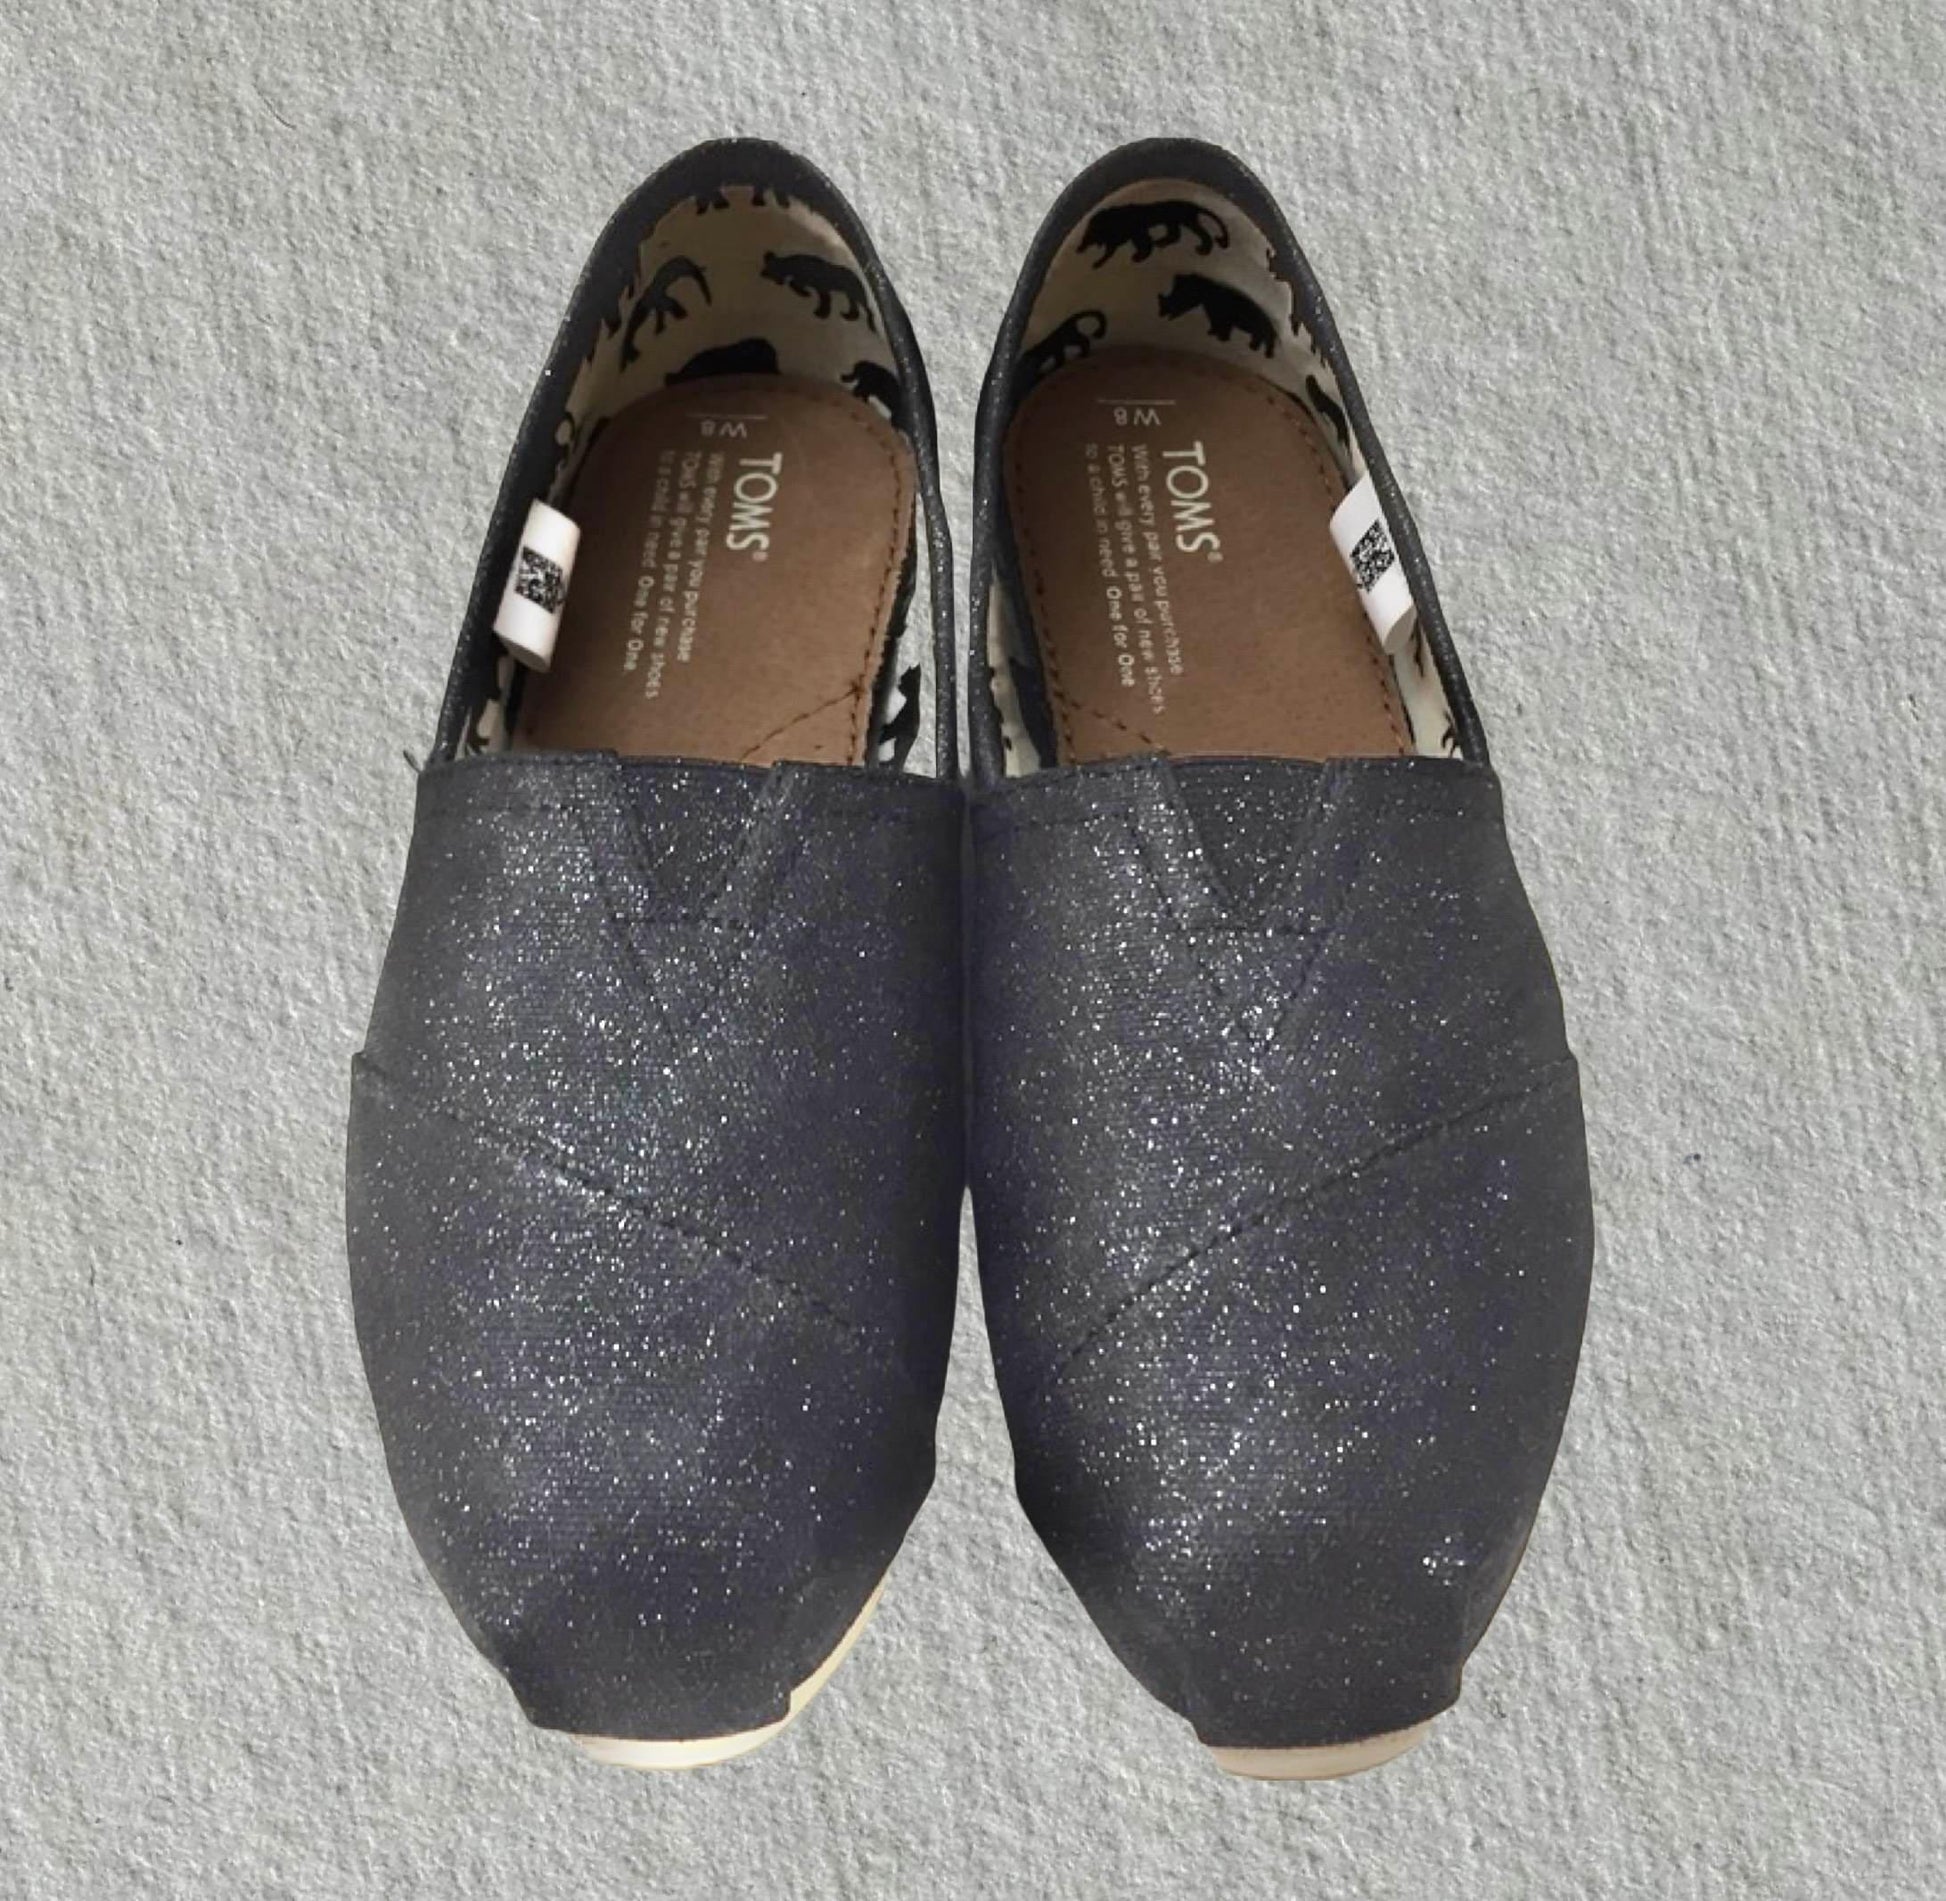 Charcoal Glitter Shoes-Shoes-ButterMakesMeHappy